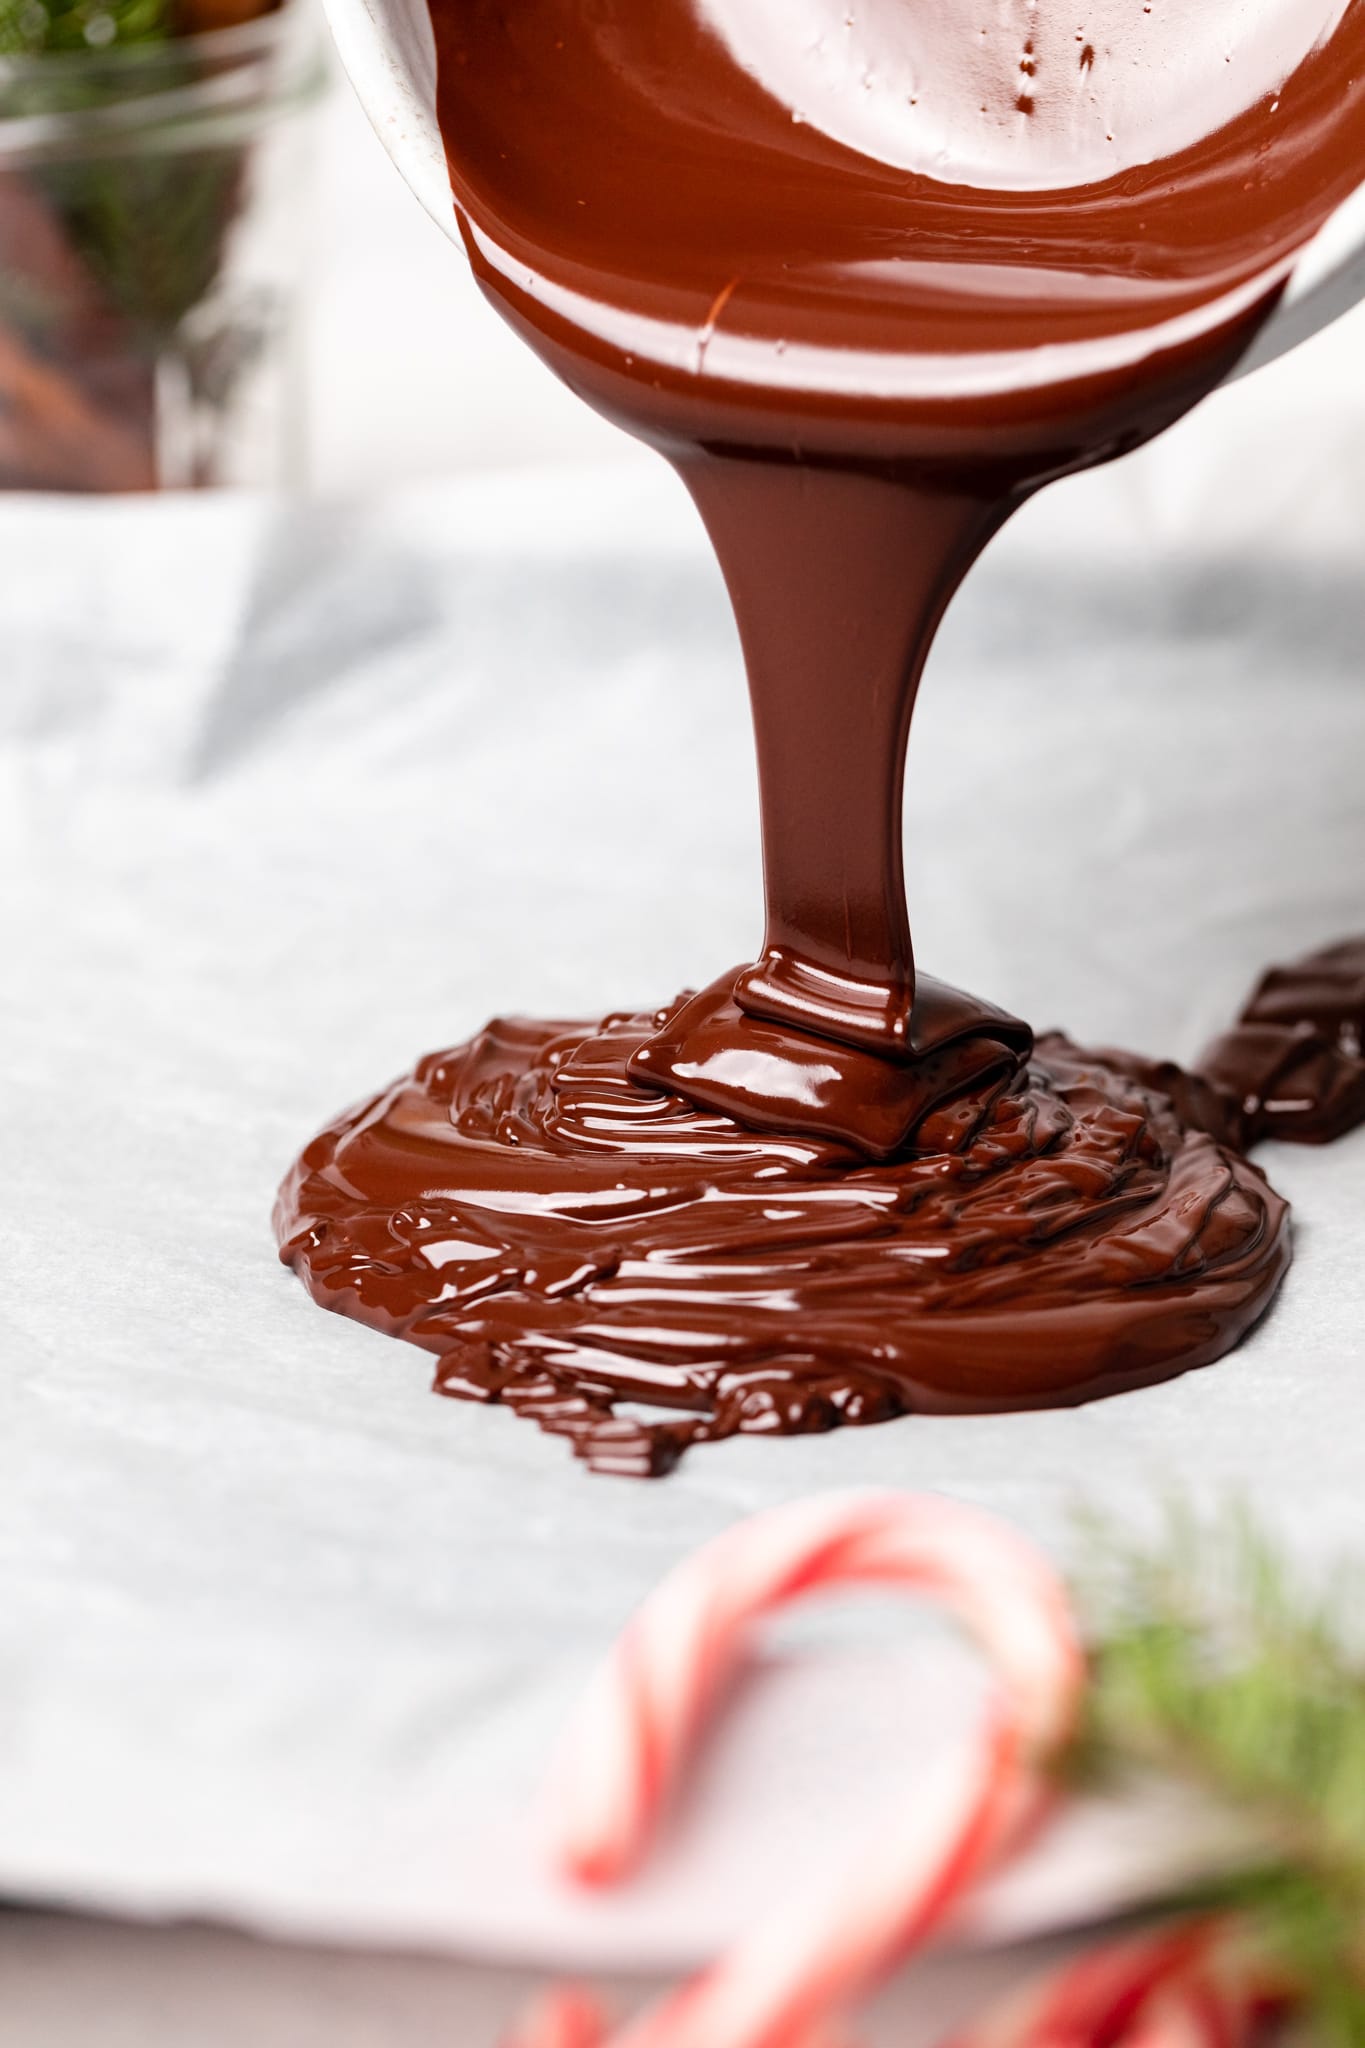 melted chocolate being poured on parchment